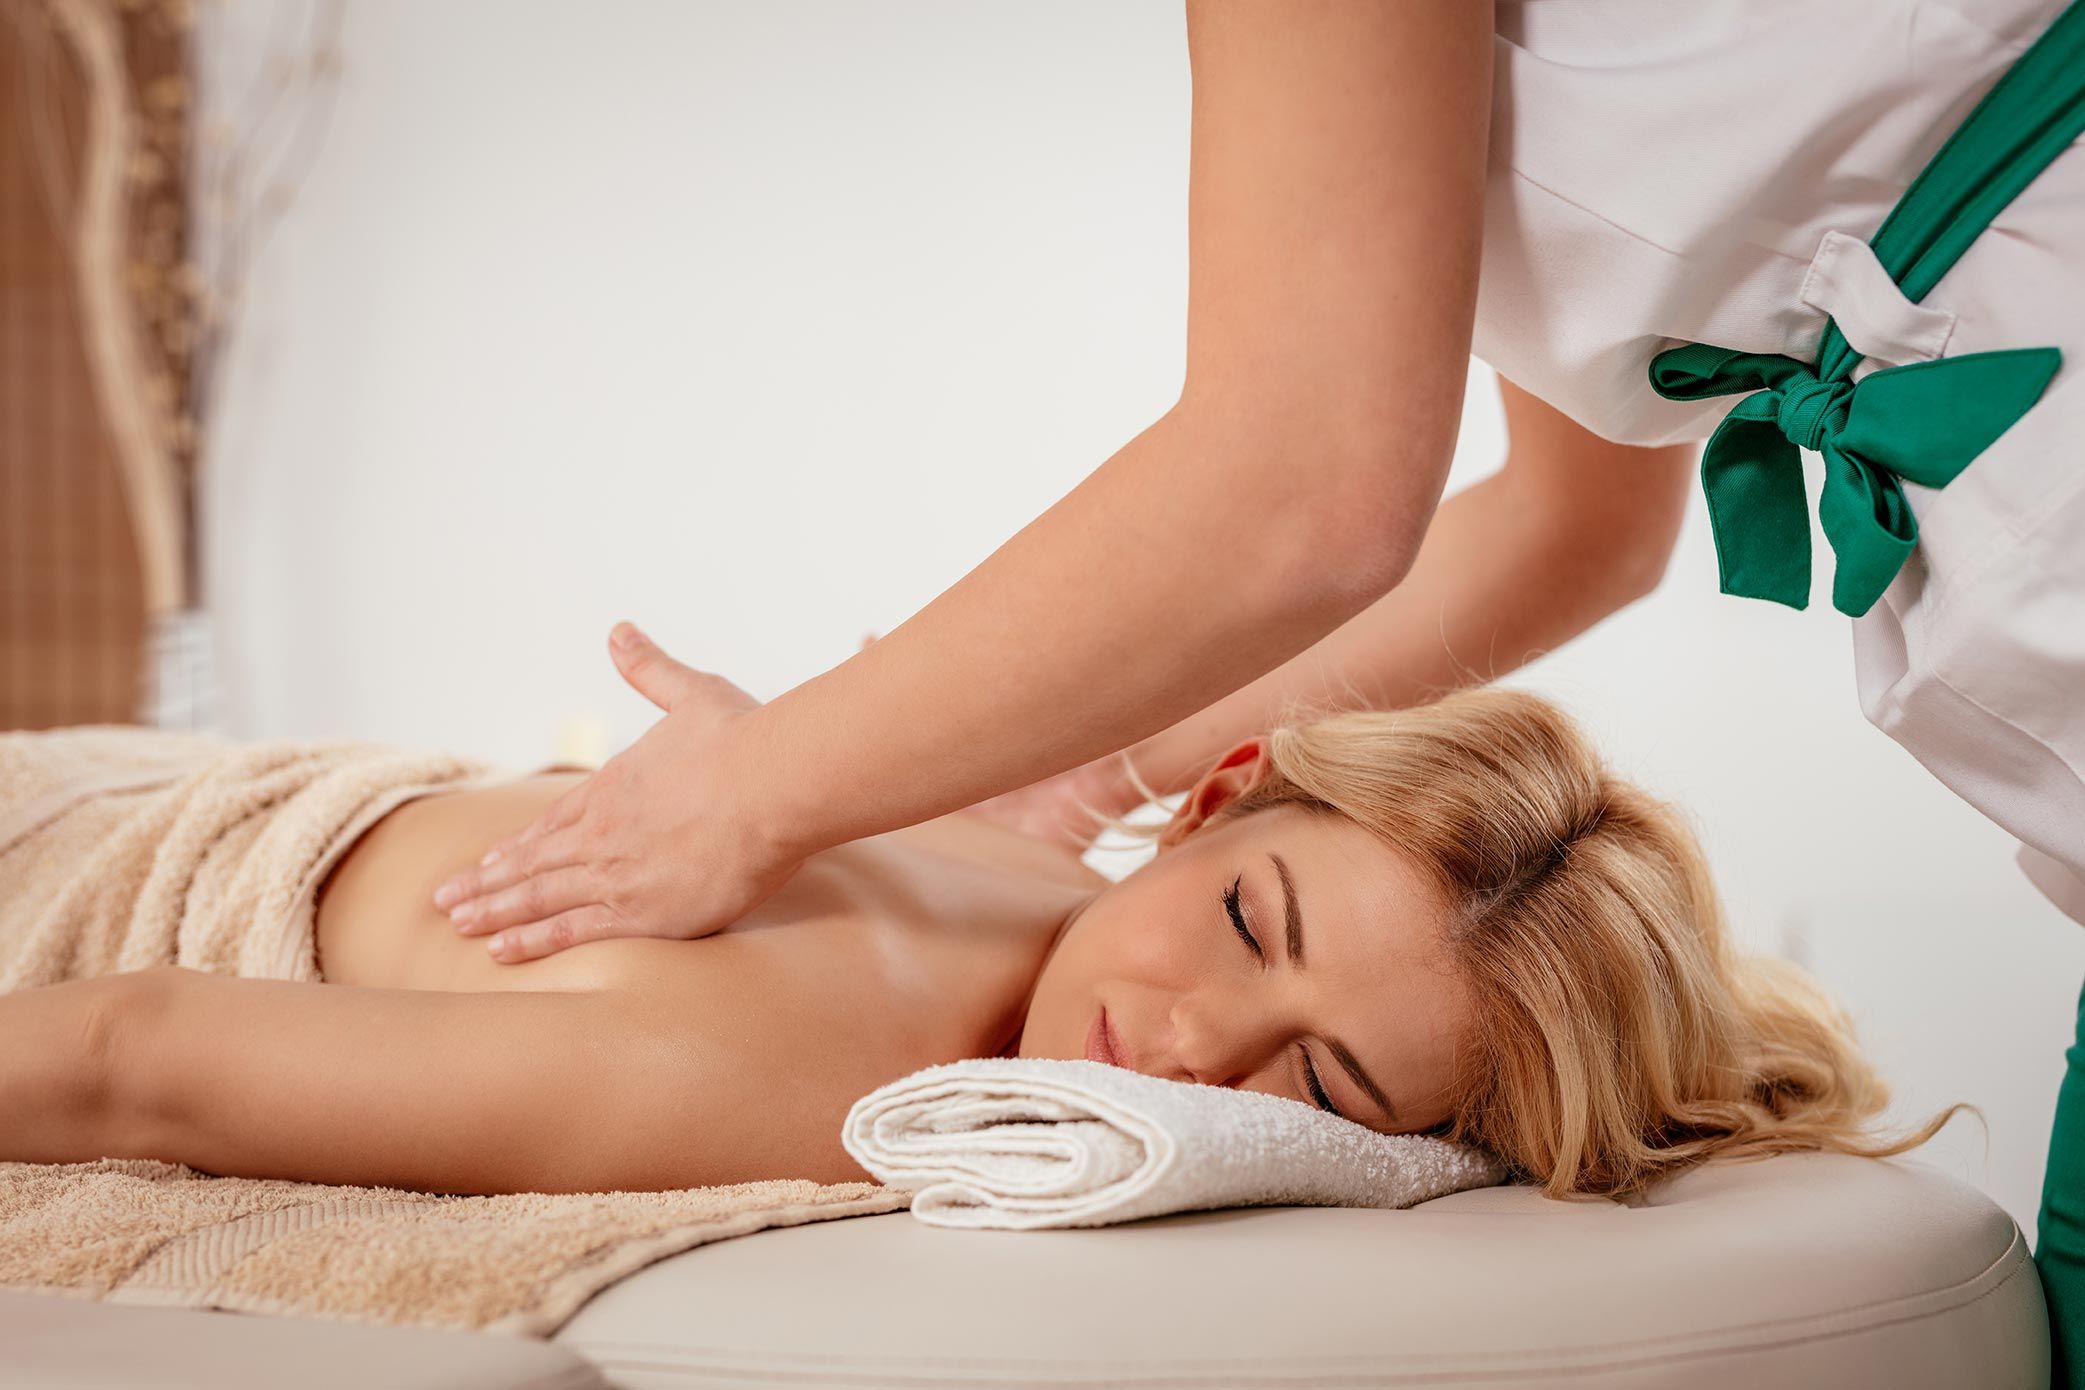 Aristocracy Salon & Day Spa has highly skilled and trained massage therapists